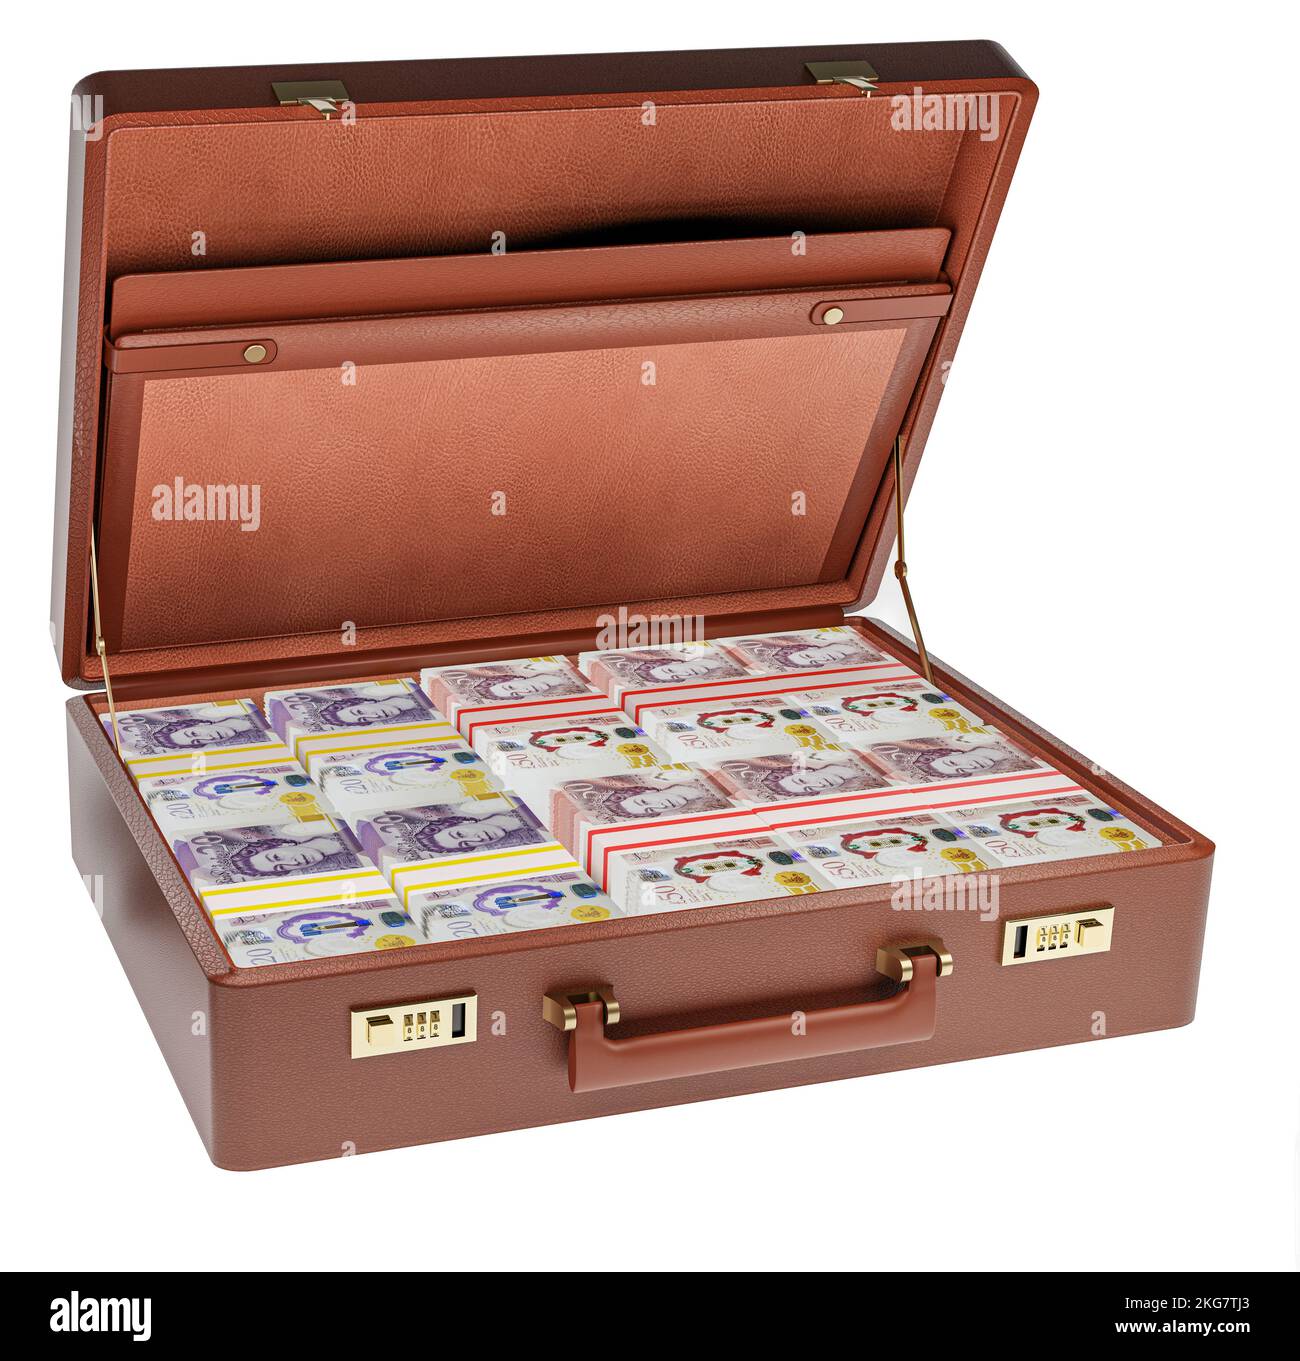 briefcase full of UK money bundles of british currency stacked in a briefcase briefcase full of £20 and £50 bank notes banknotes Stock Photo